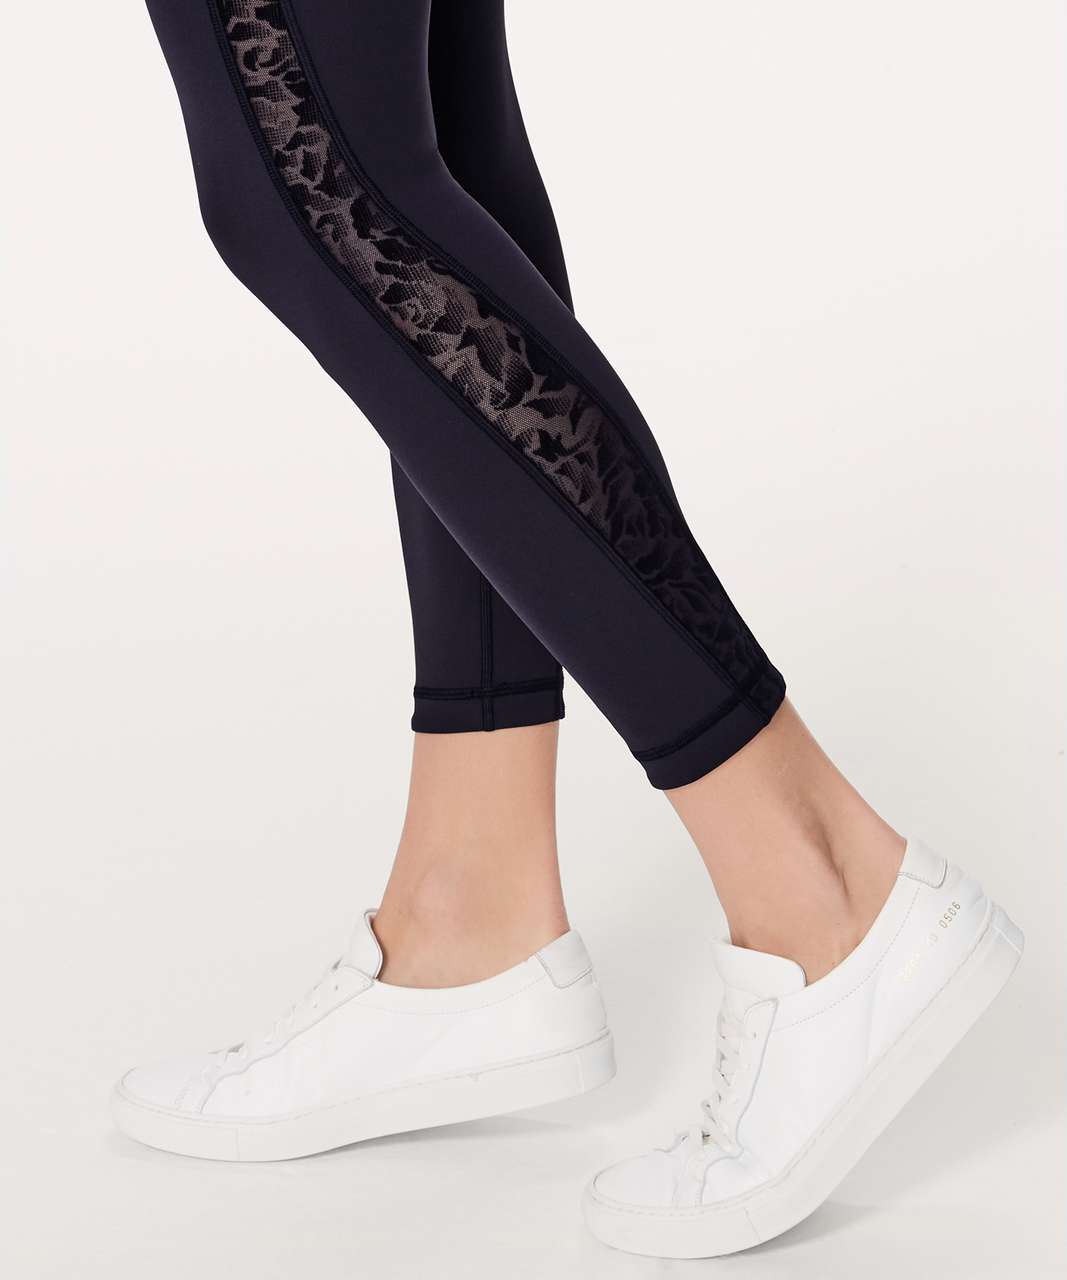 Lululemon Meant To Move 7/8 Tight (25) - Black / Flocked Floral